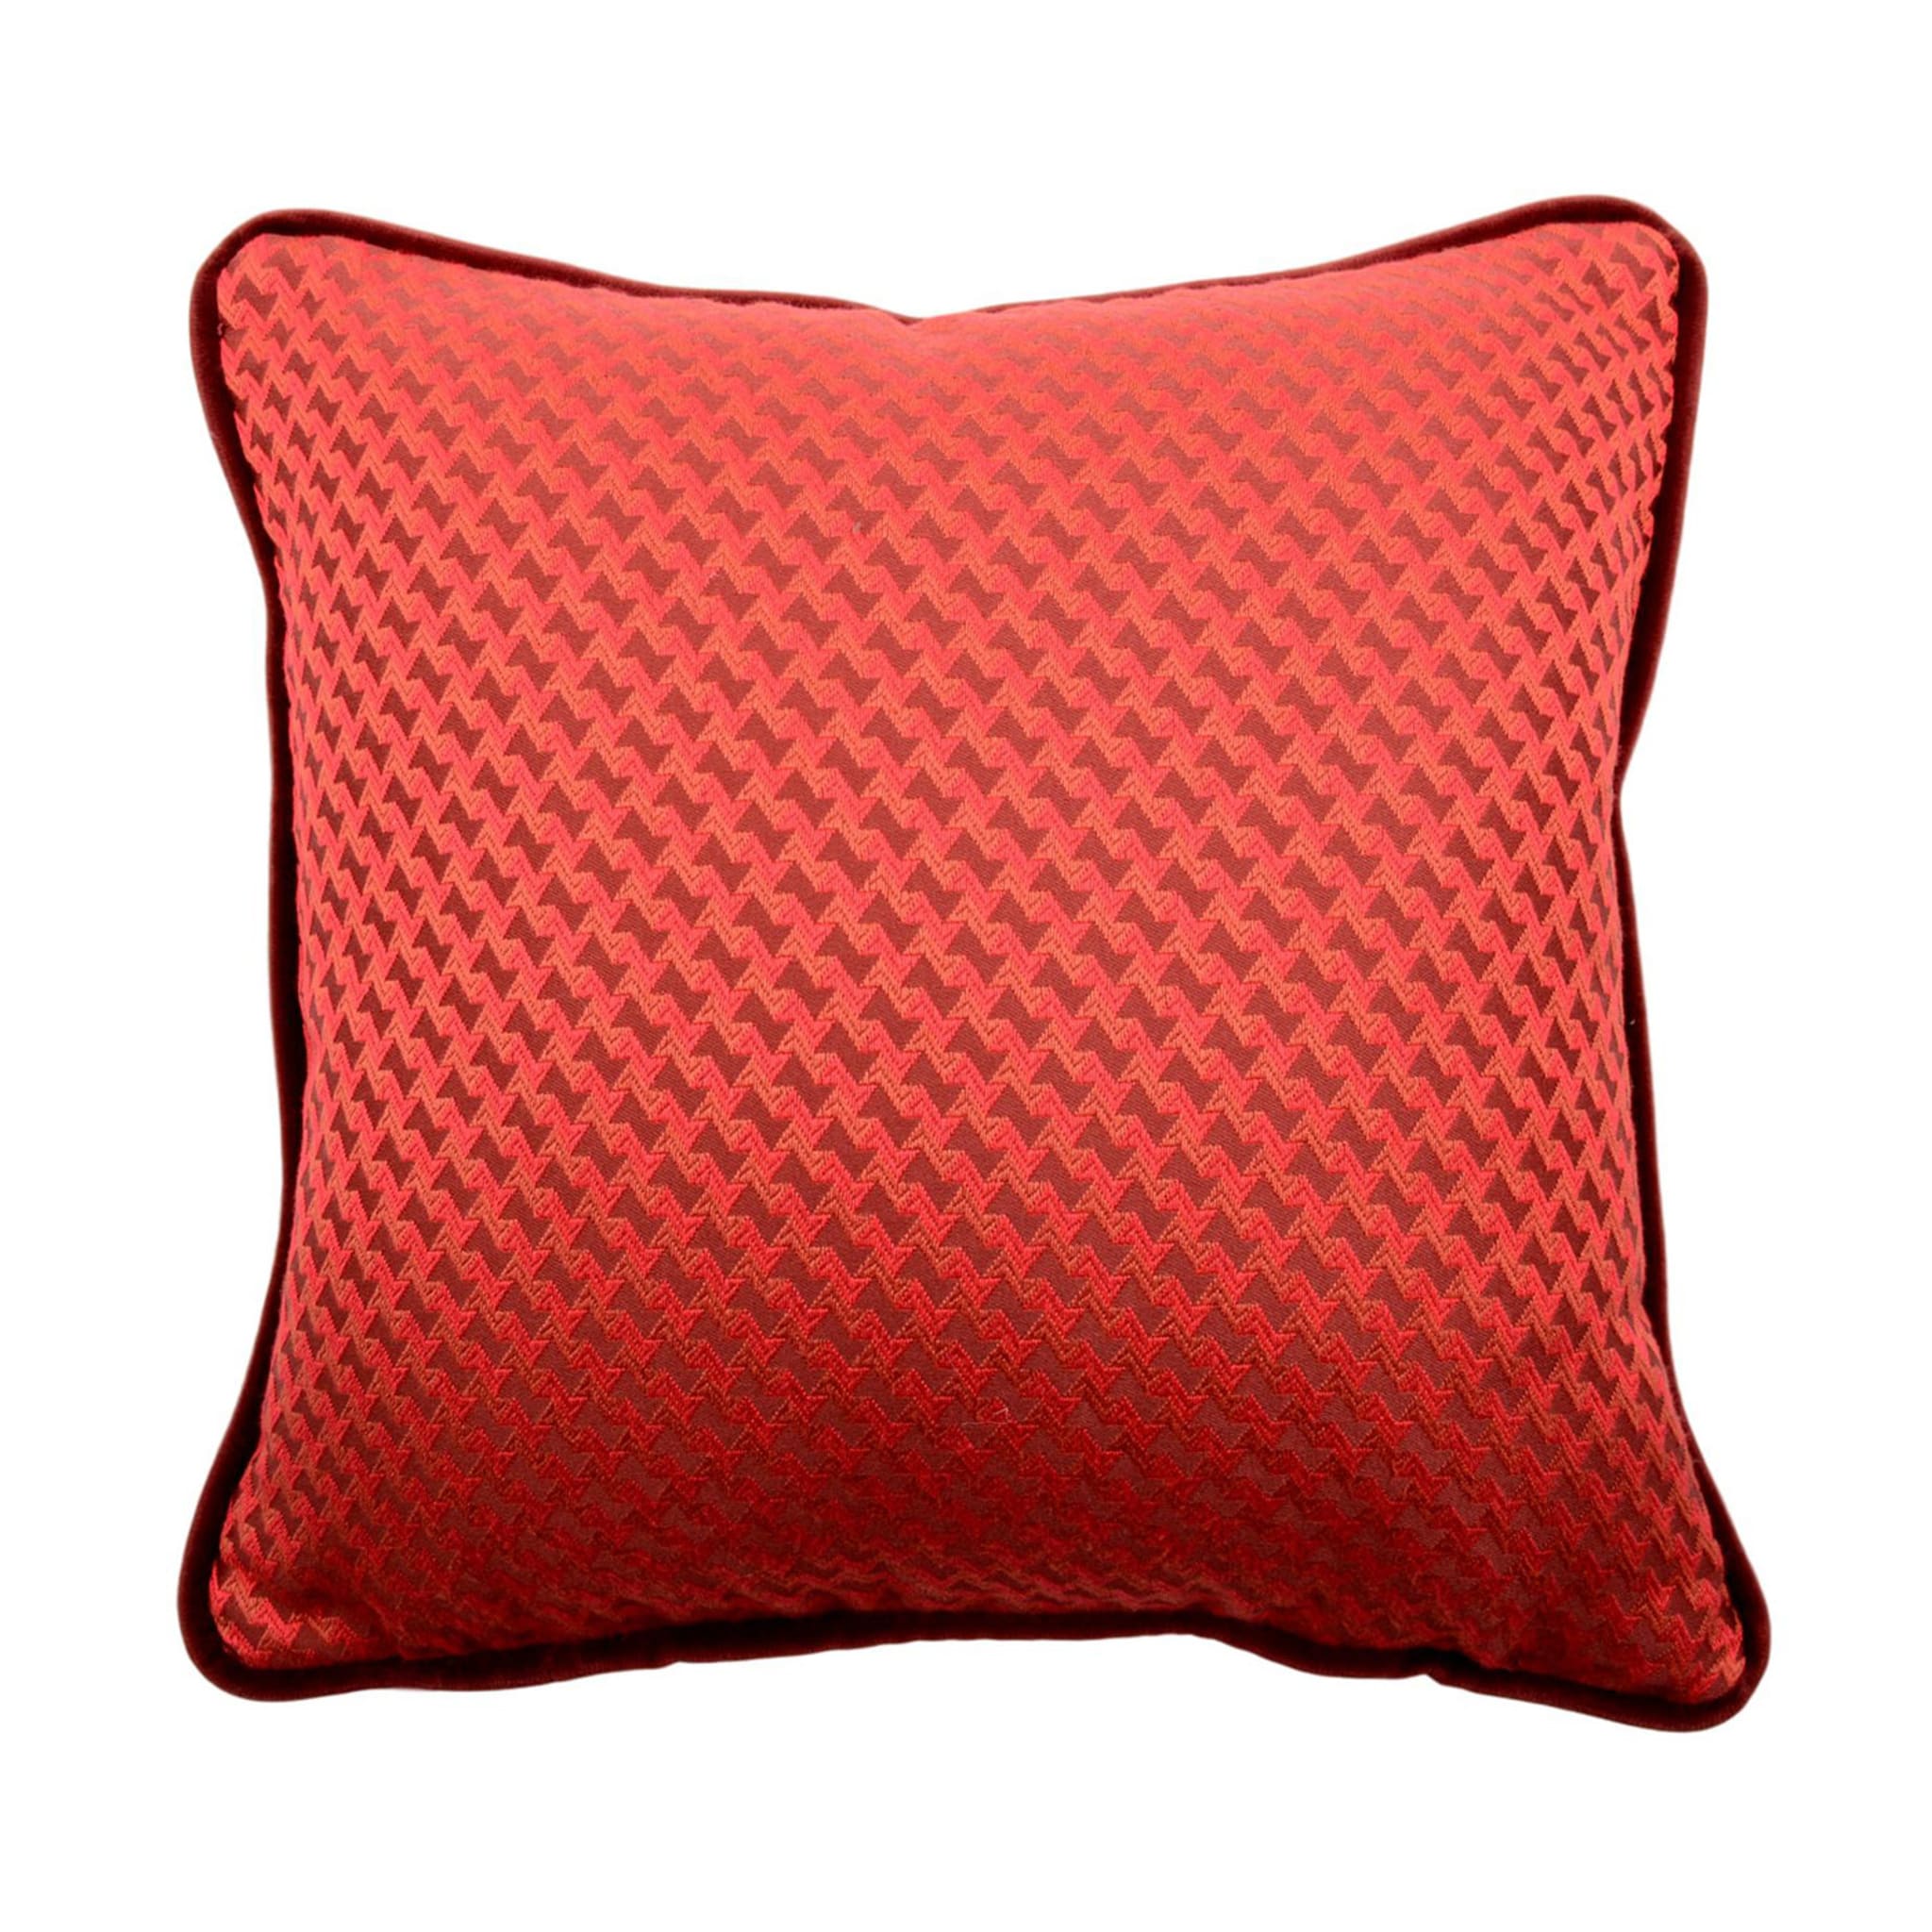 Red Carrè Cushion in micro patterned jacquard fabric - Main view